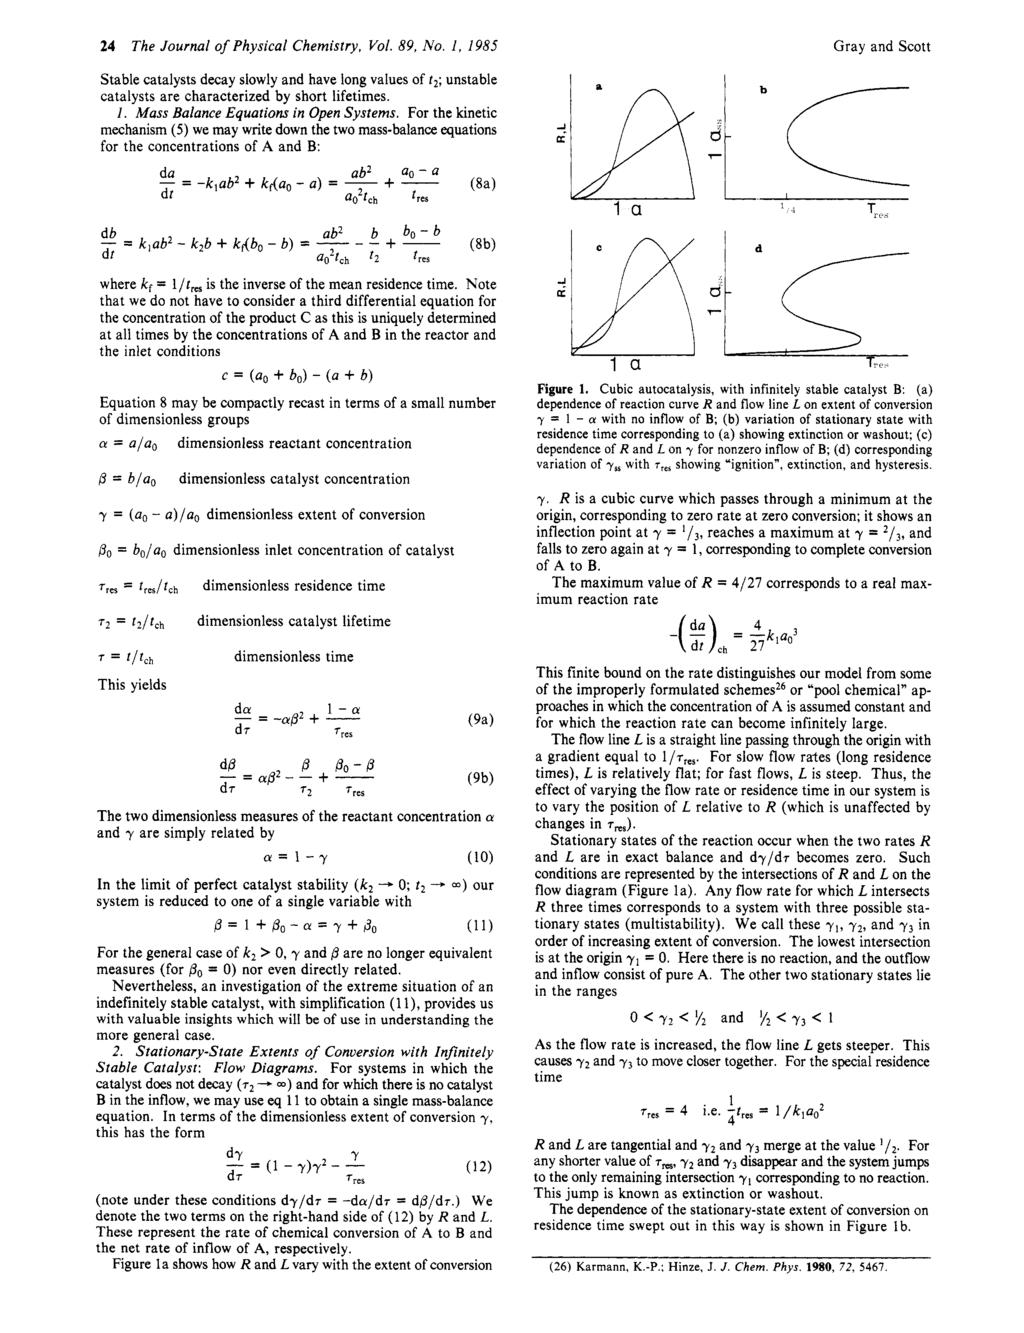 24 The Journal of Physical Chemistry, Vol. 89, No. 1, 1985 Gray and Scott Stable catalysts decay slowly and have long values of t2; unstable catalysts are characterized by short lifetimes. 1. Mass Balance Equations in Open Systems.